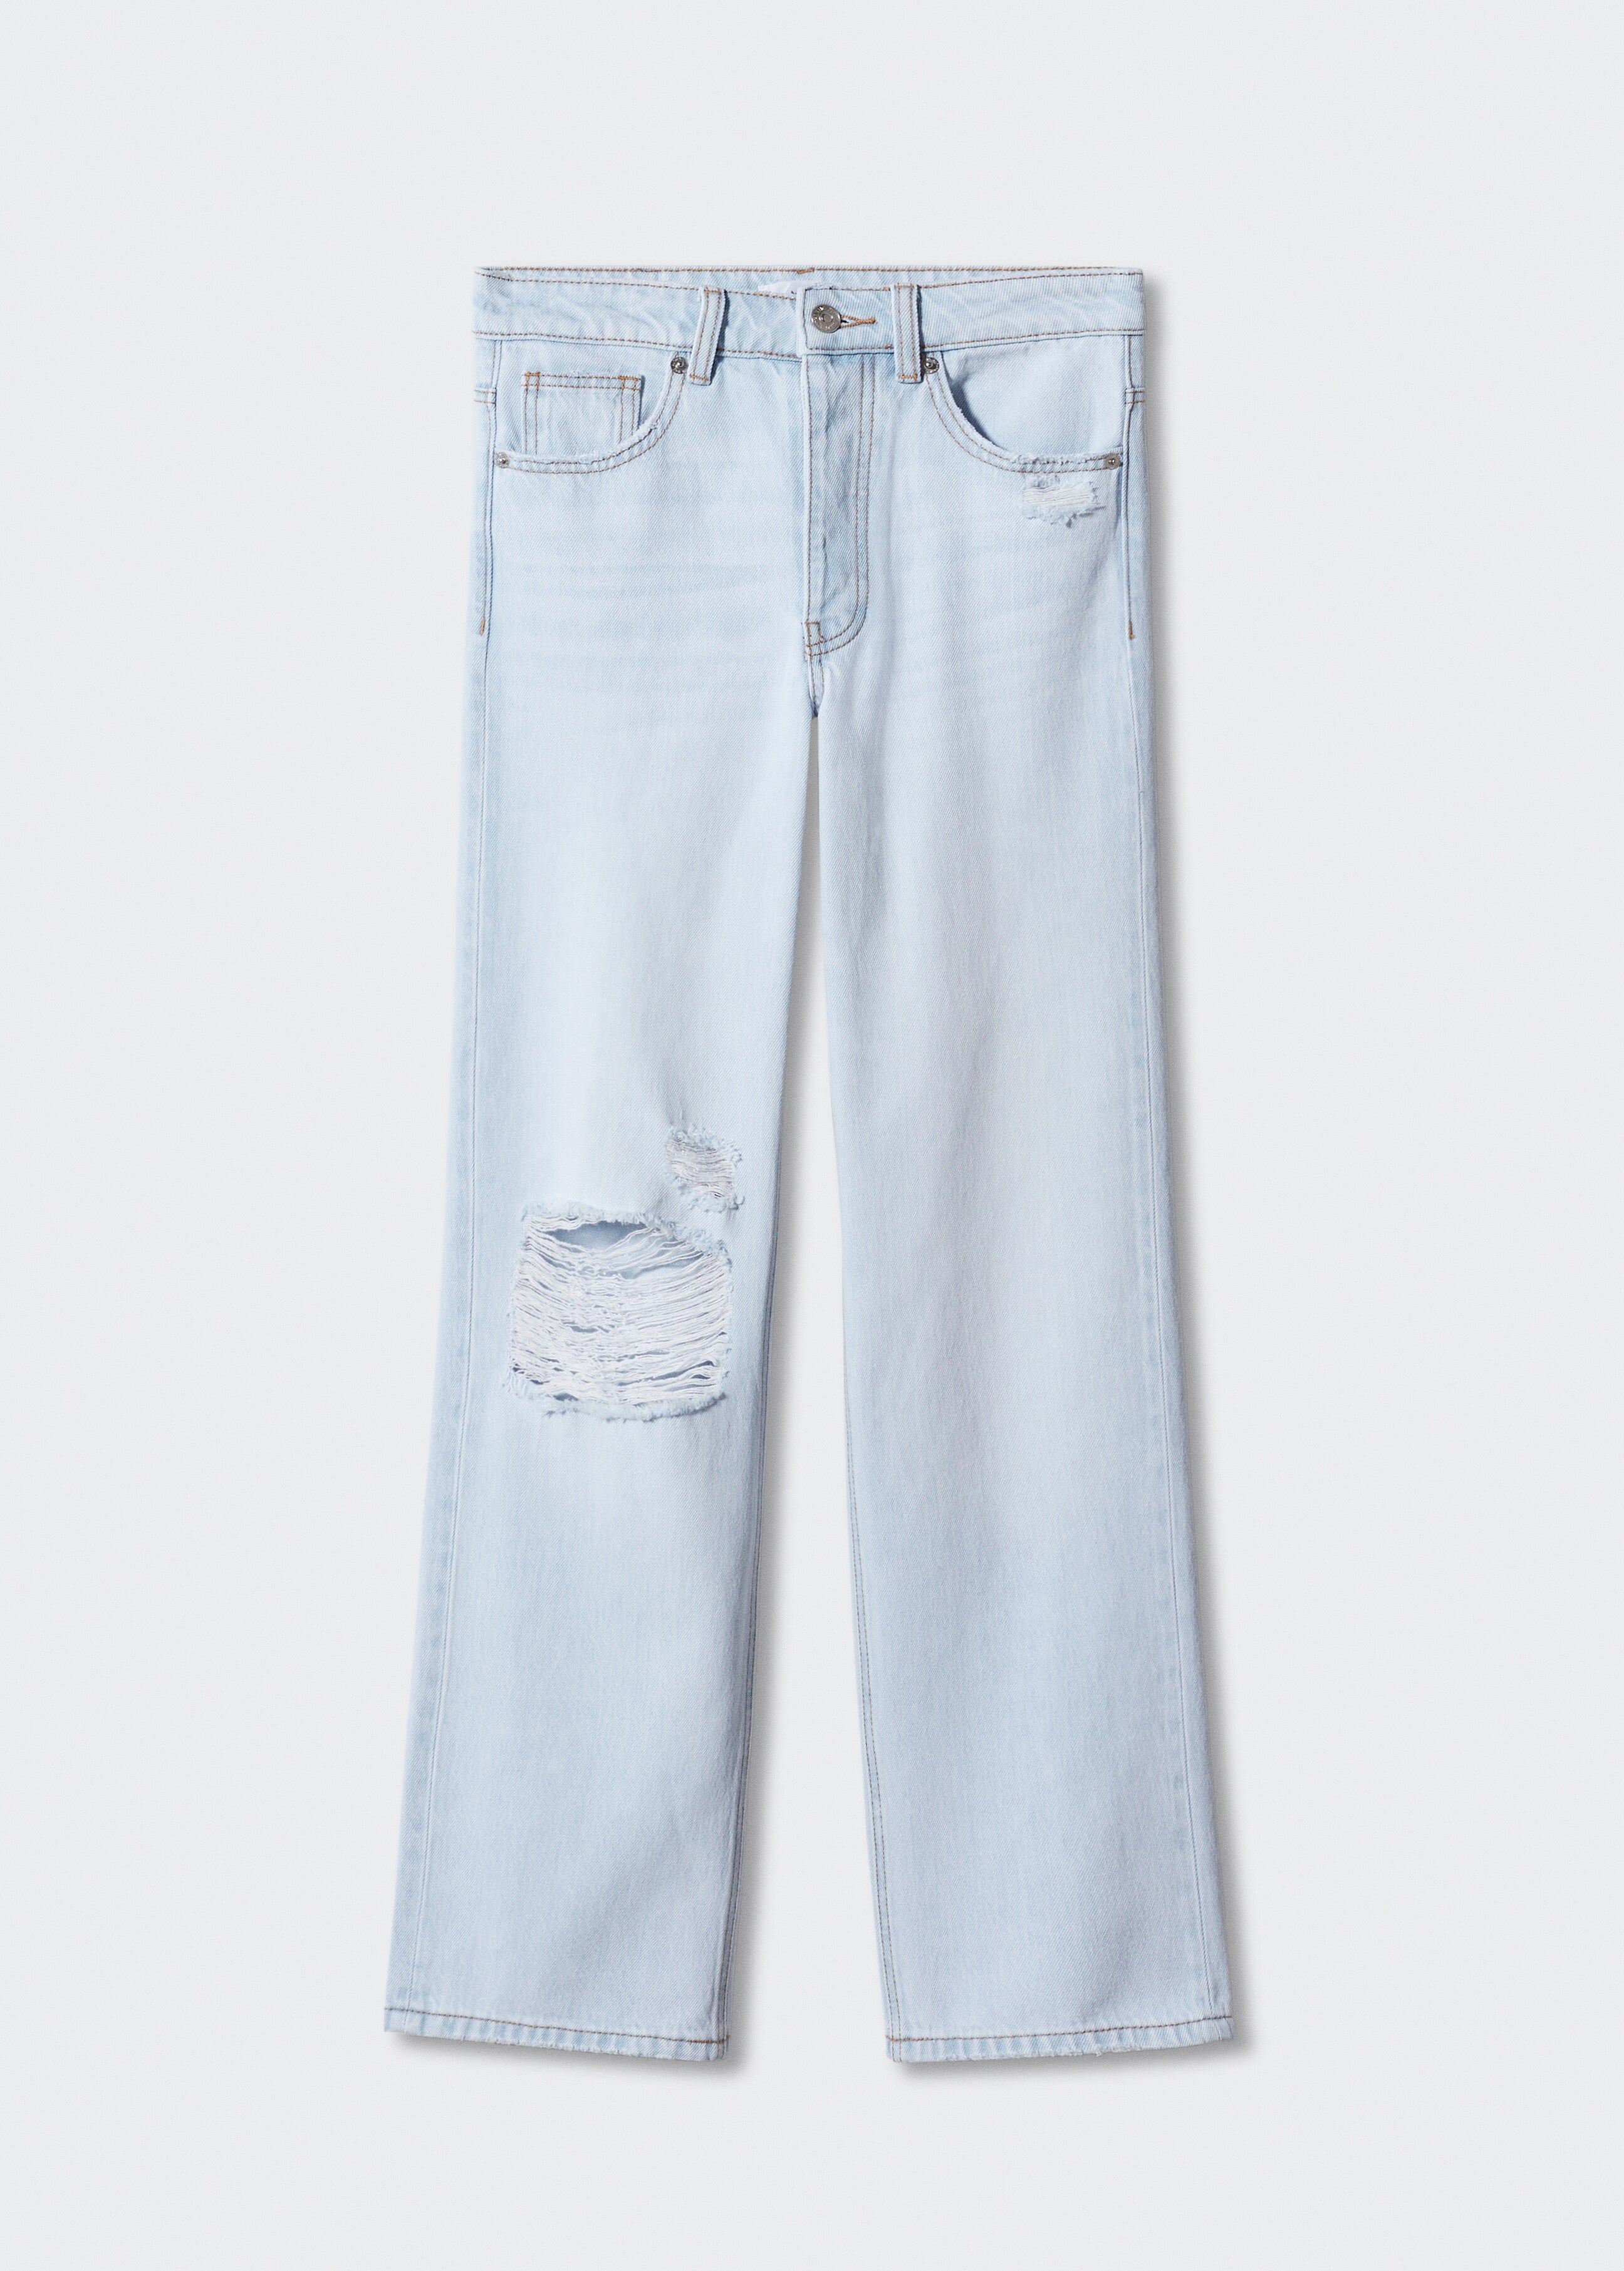 Decorative ripped wideleg jeans - Article without model